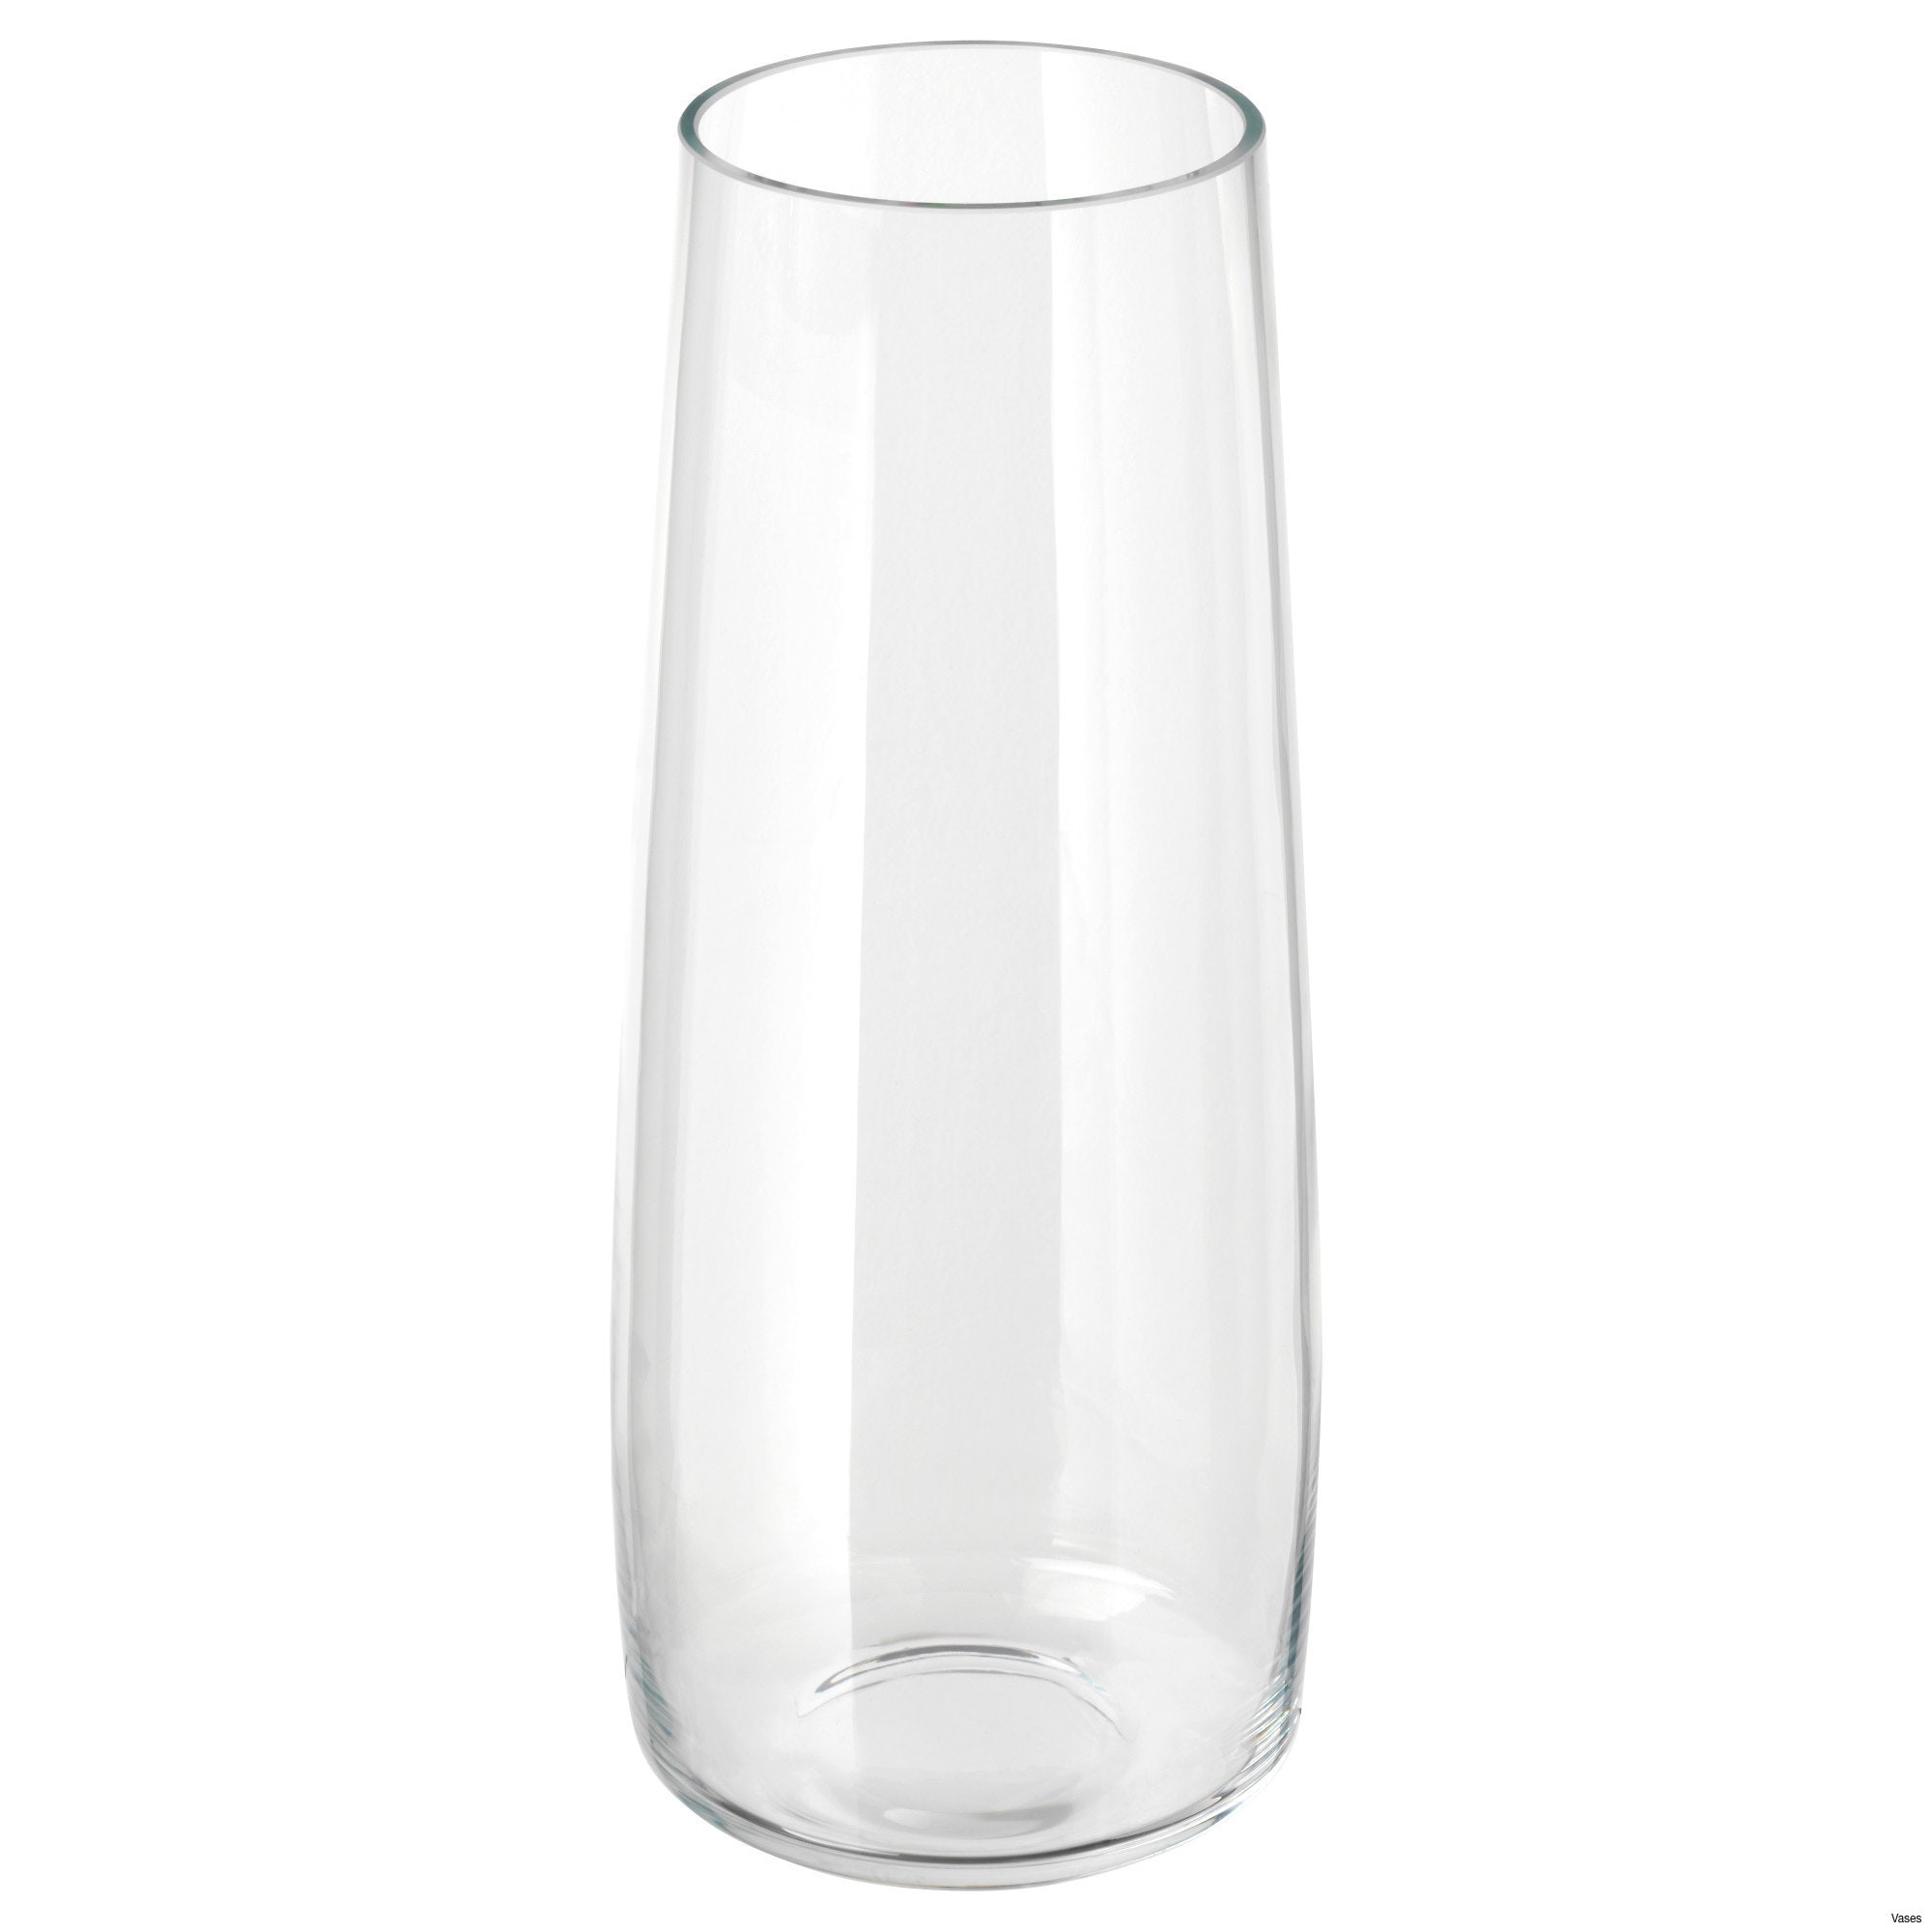 13 attractive 24 Inch Glass Vase 2024 free download 24 inch glass vase of large glass vases stock 24 inch vases bulk 23 5 flared glass vase throughout large glass vases pictures clear glass planters fresh clear glass vases of large glass vase